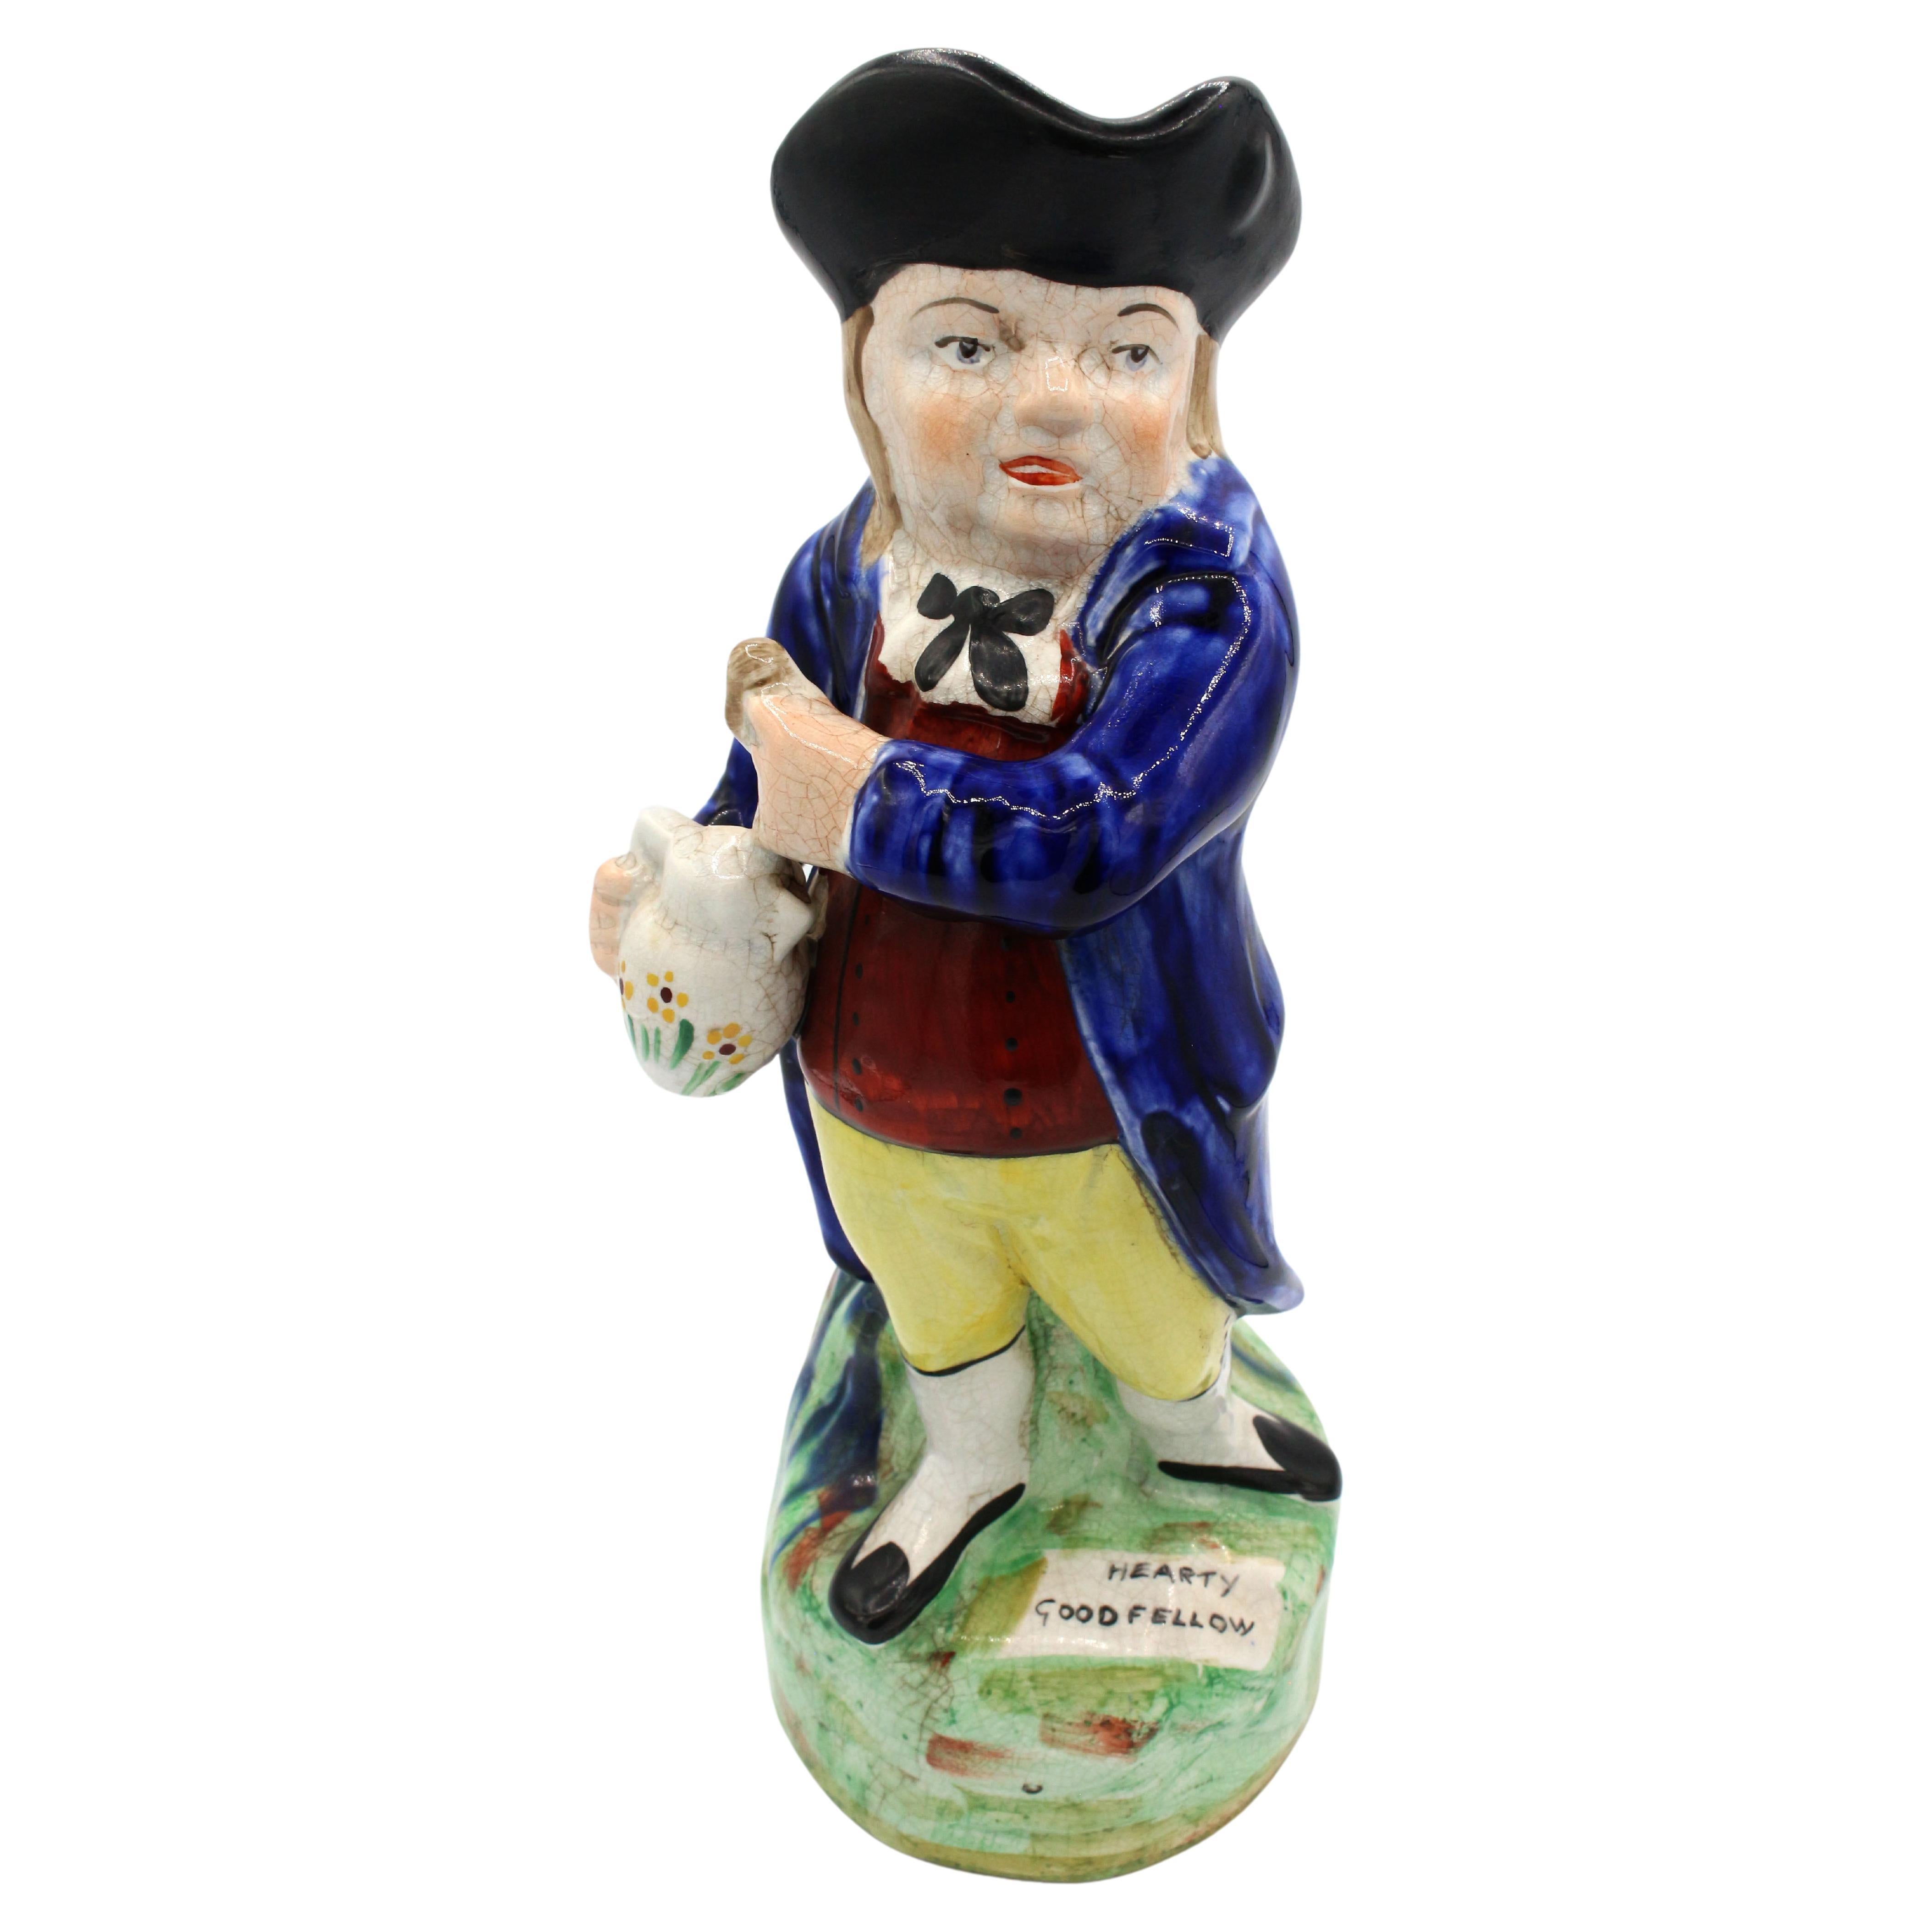 Pichet Toby Hearty Goodfellow, fin du 19e siècle, Staffordshire, Angleterre